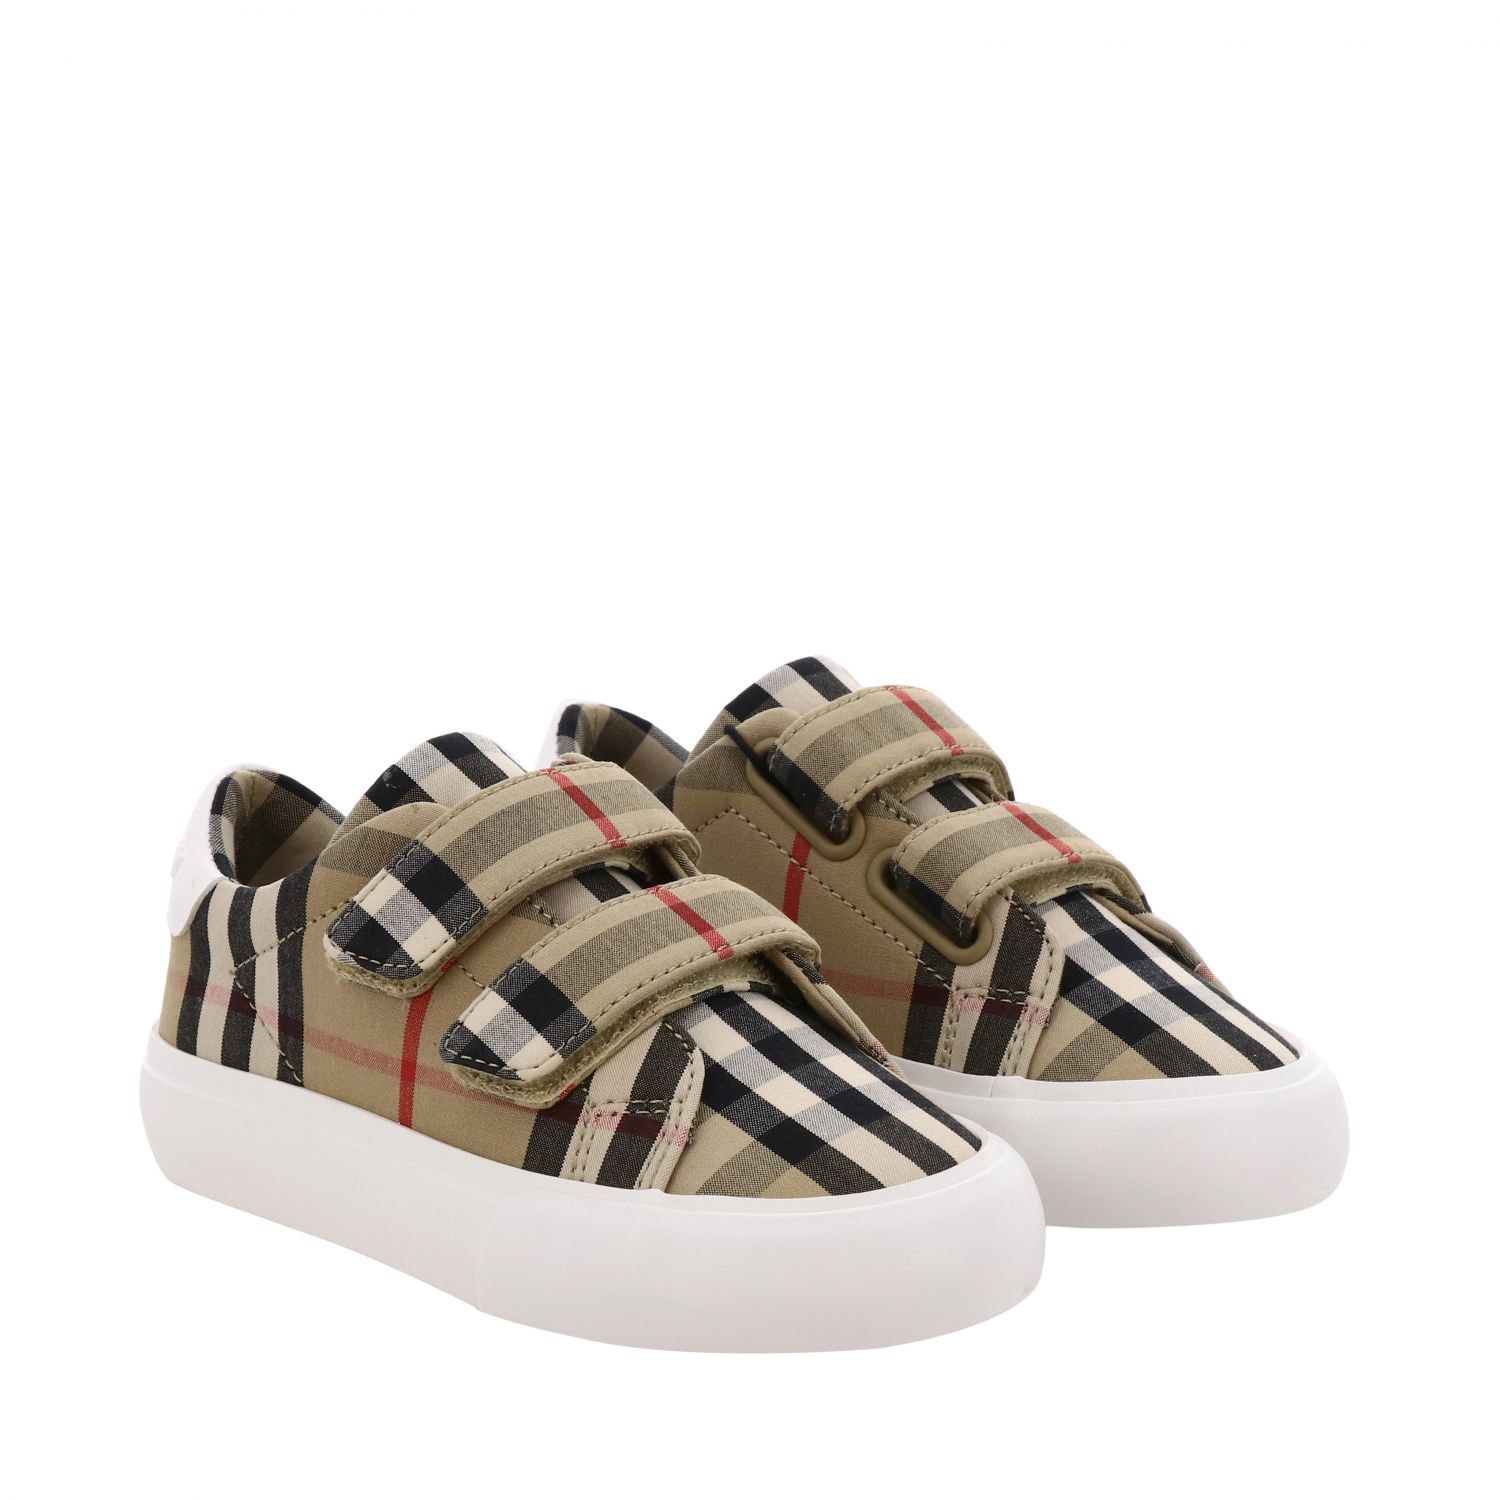 Burberry sneakers in check canvas and leather with logo | Shoes ...